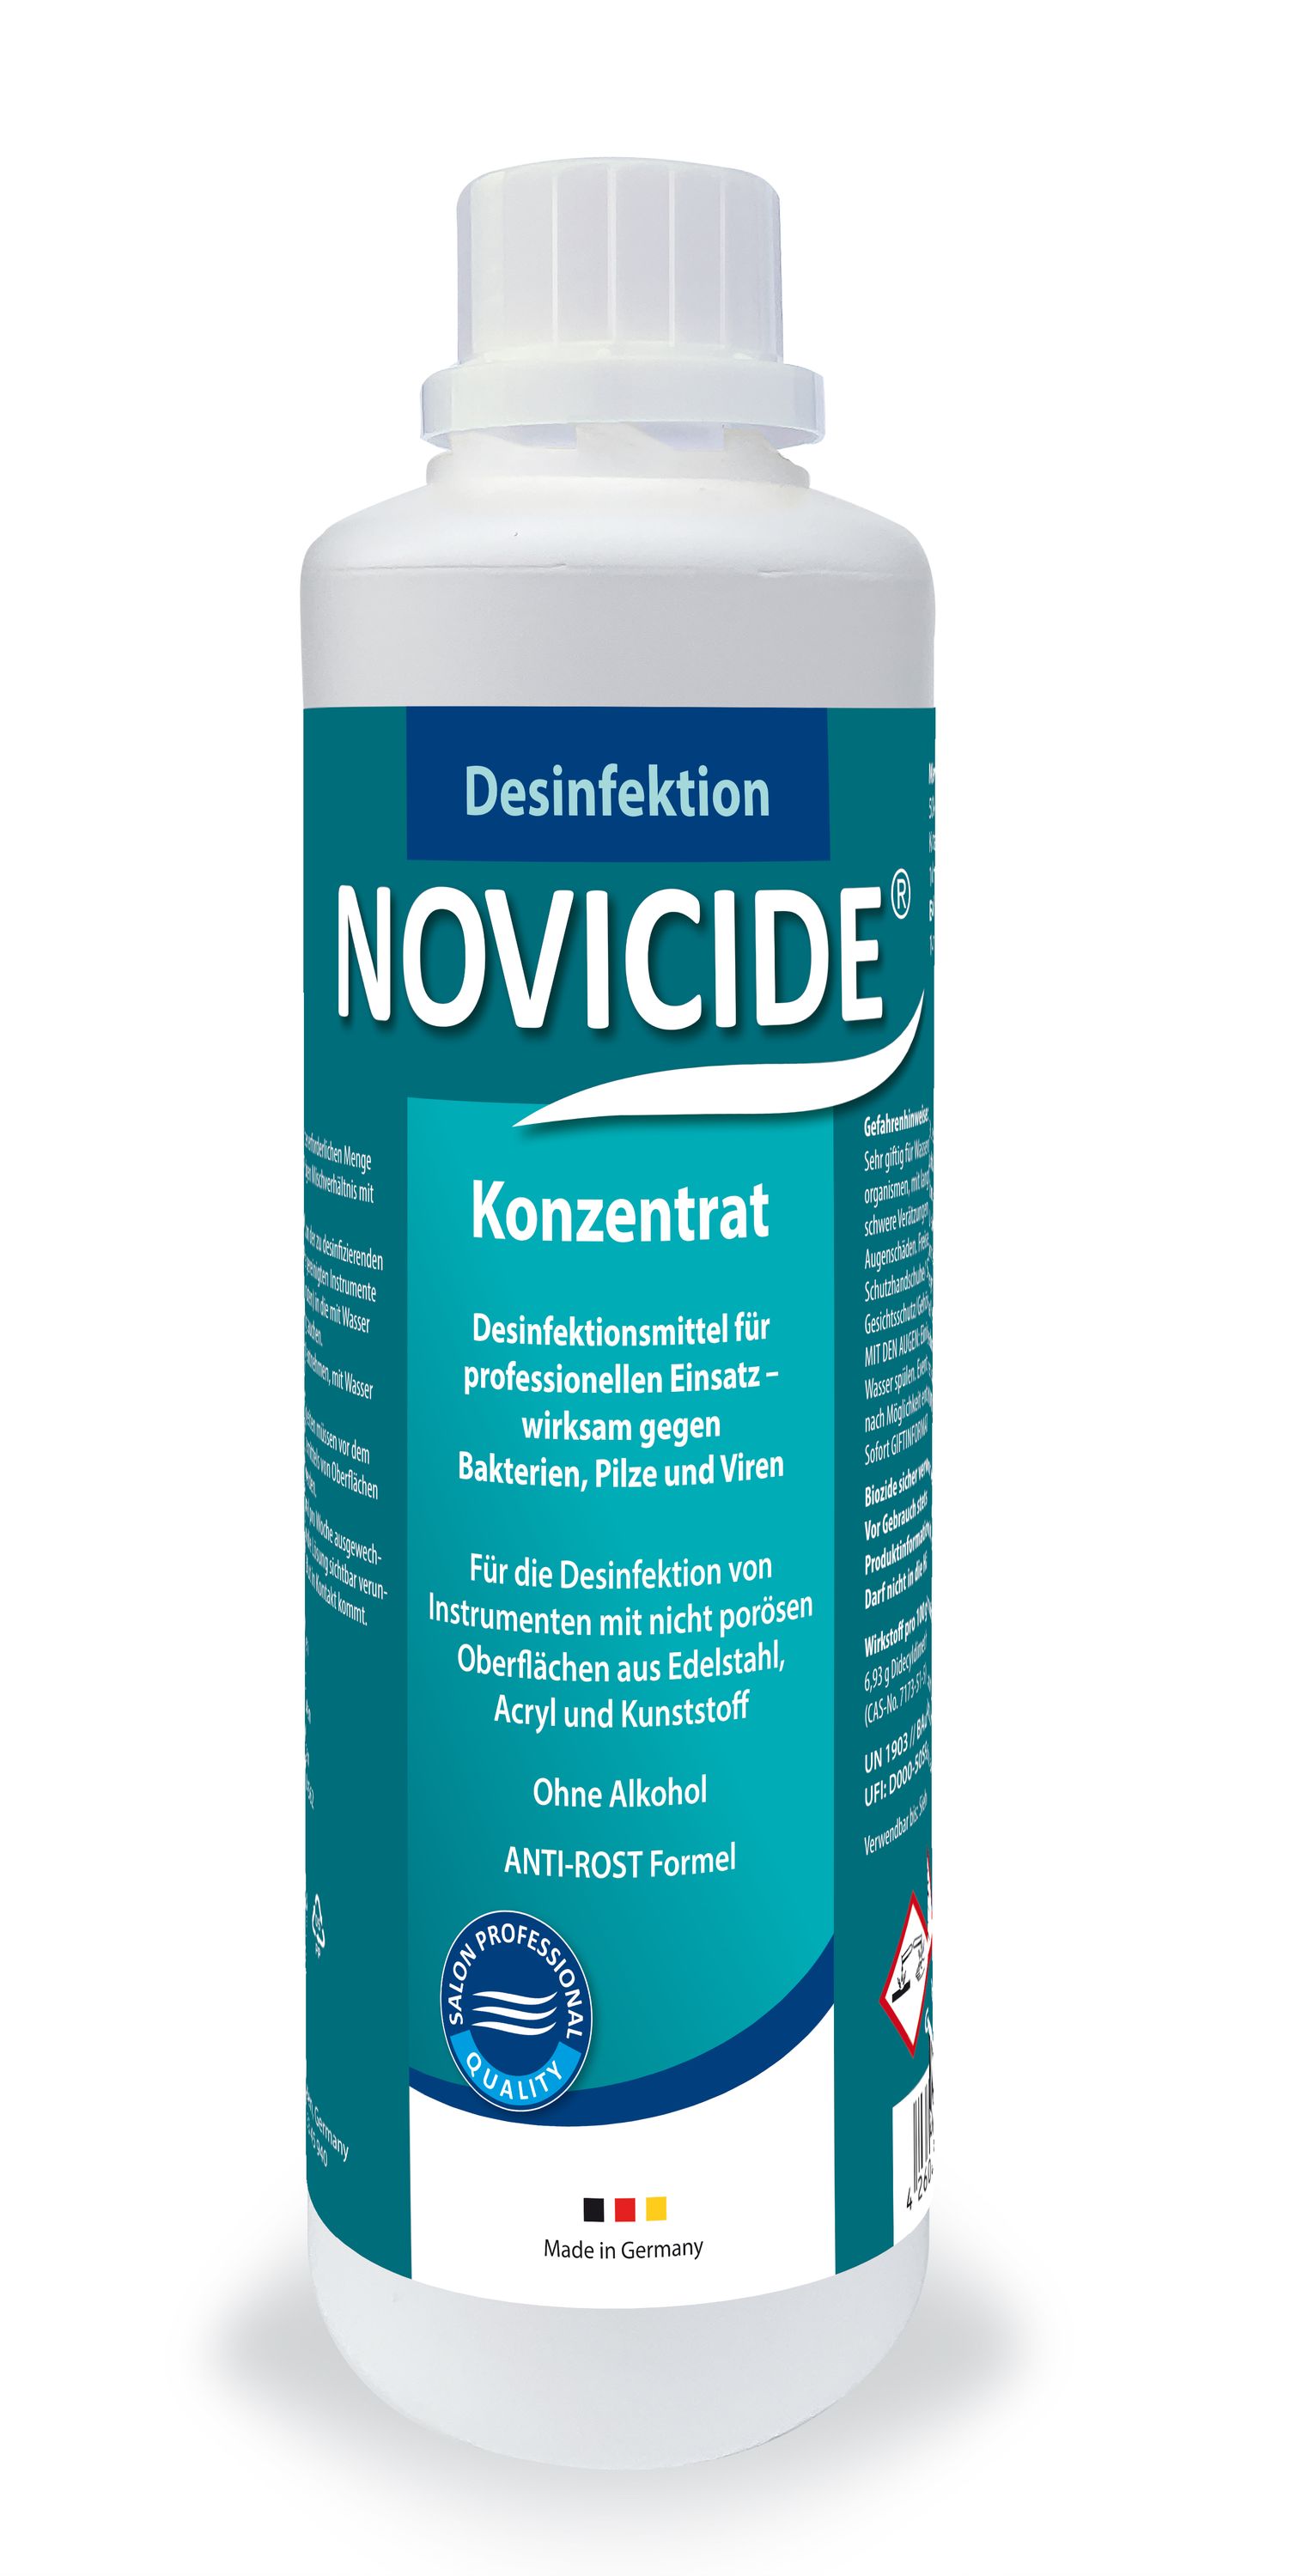 Novicide disinfectant concentrate